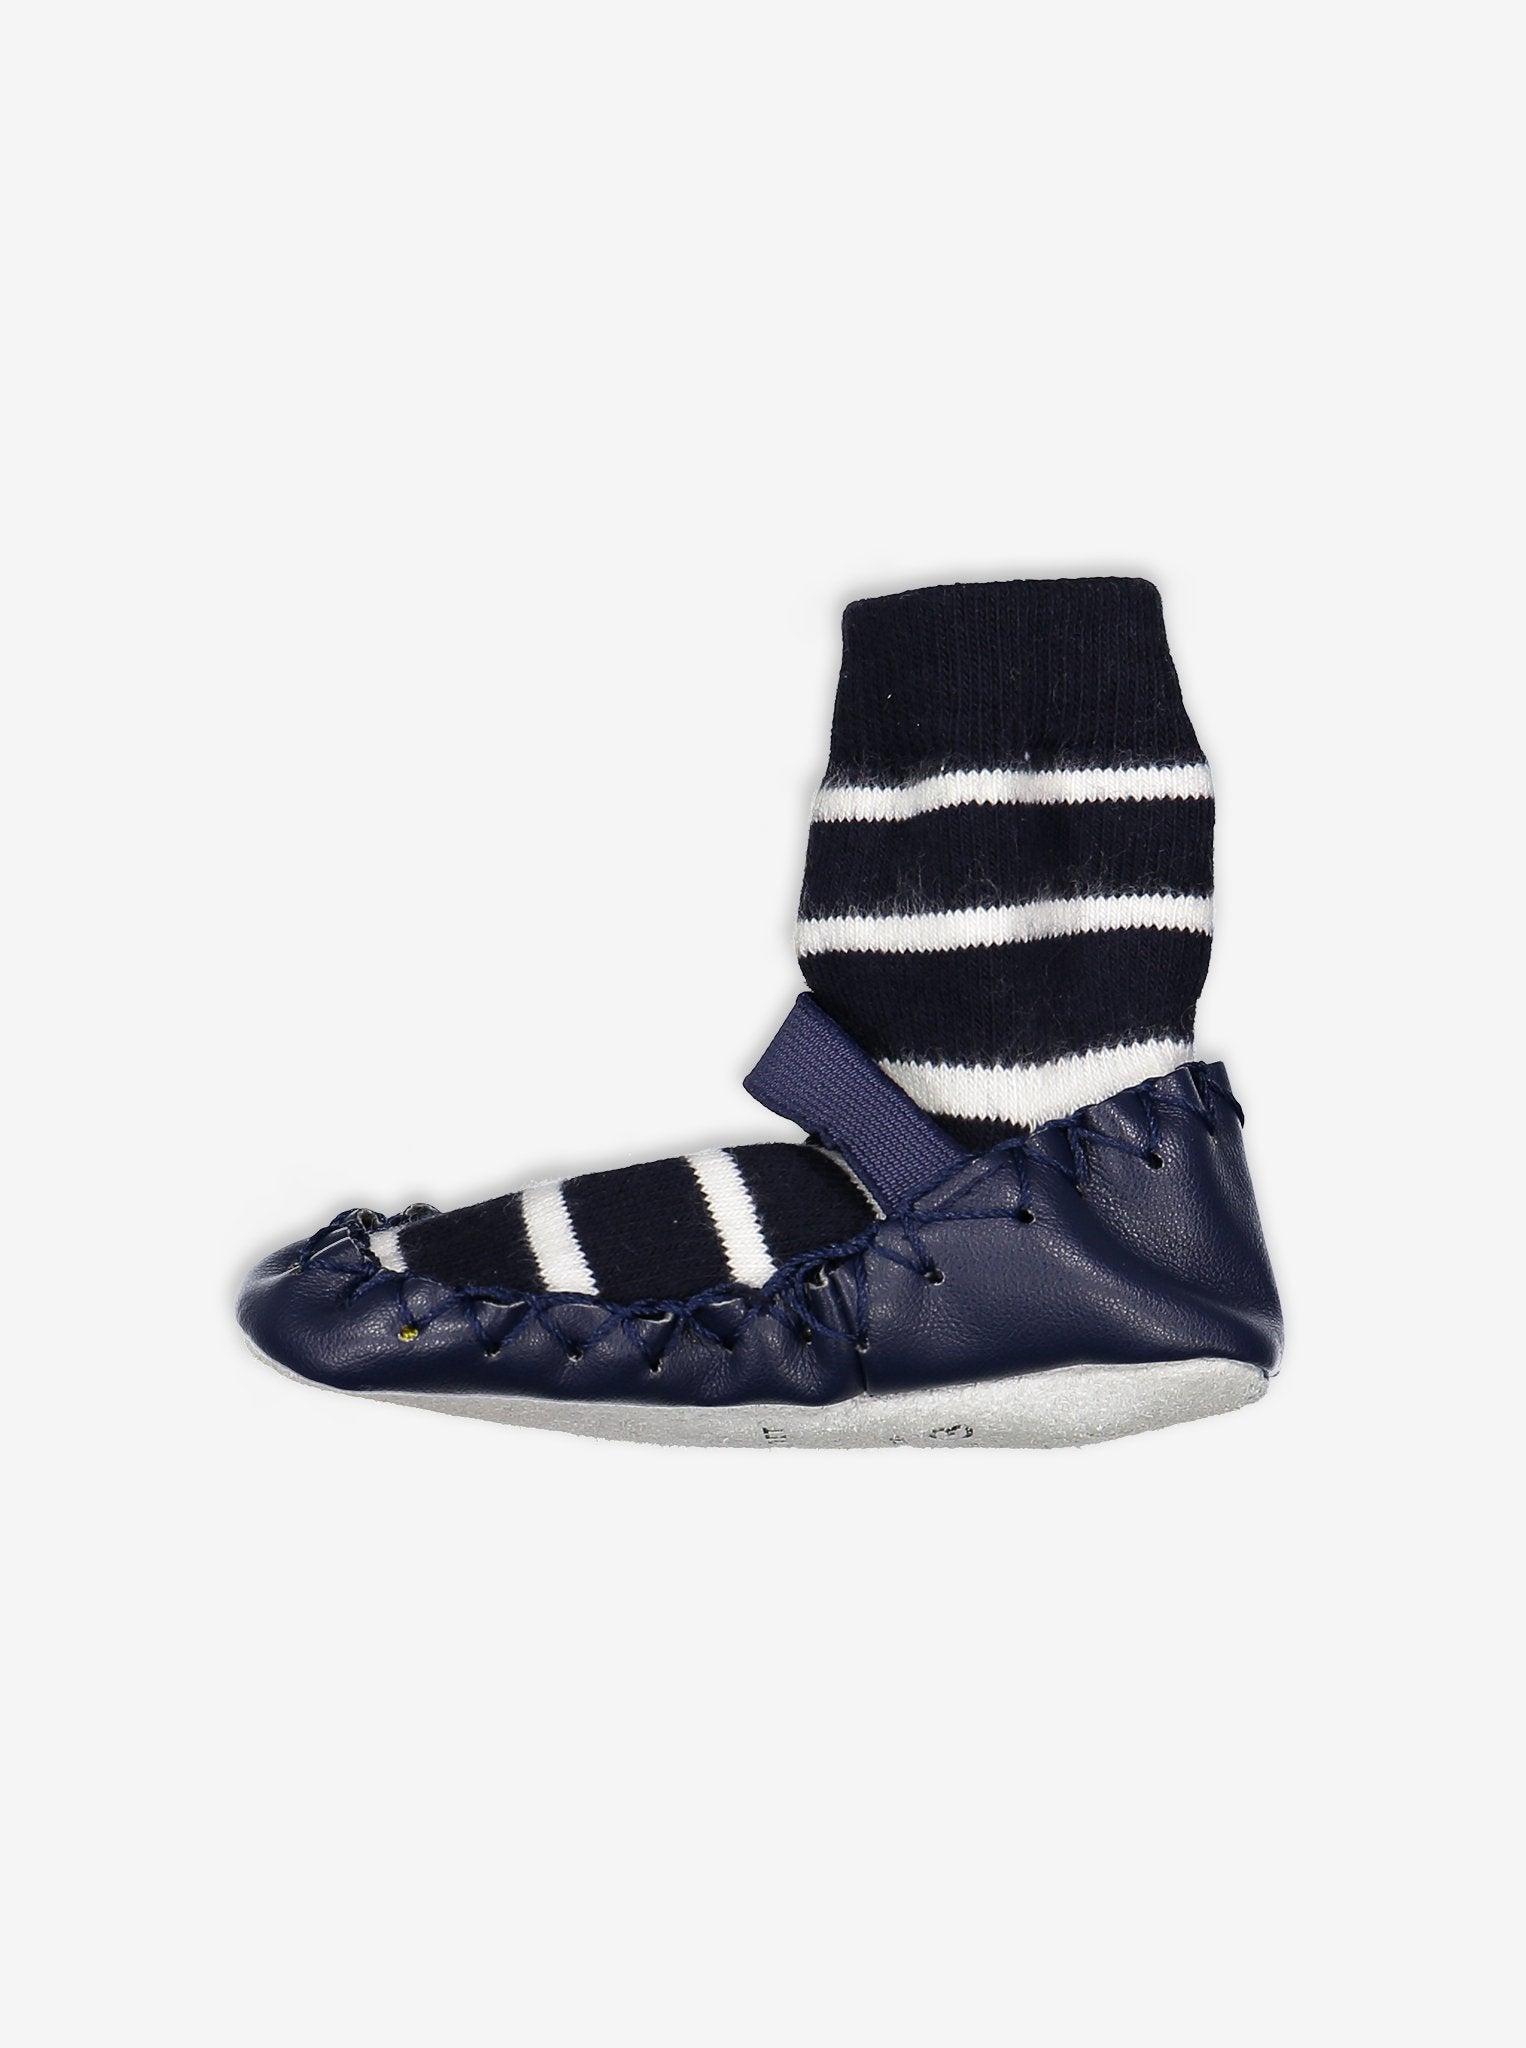 PO.P classic navy and white striped  Moccasins